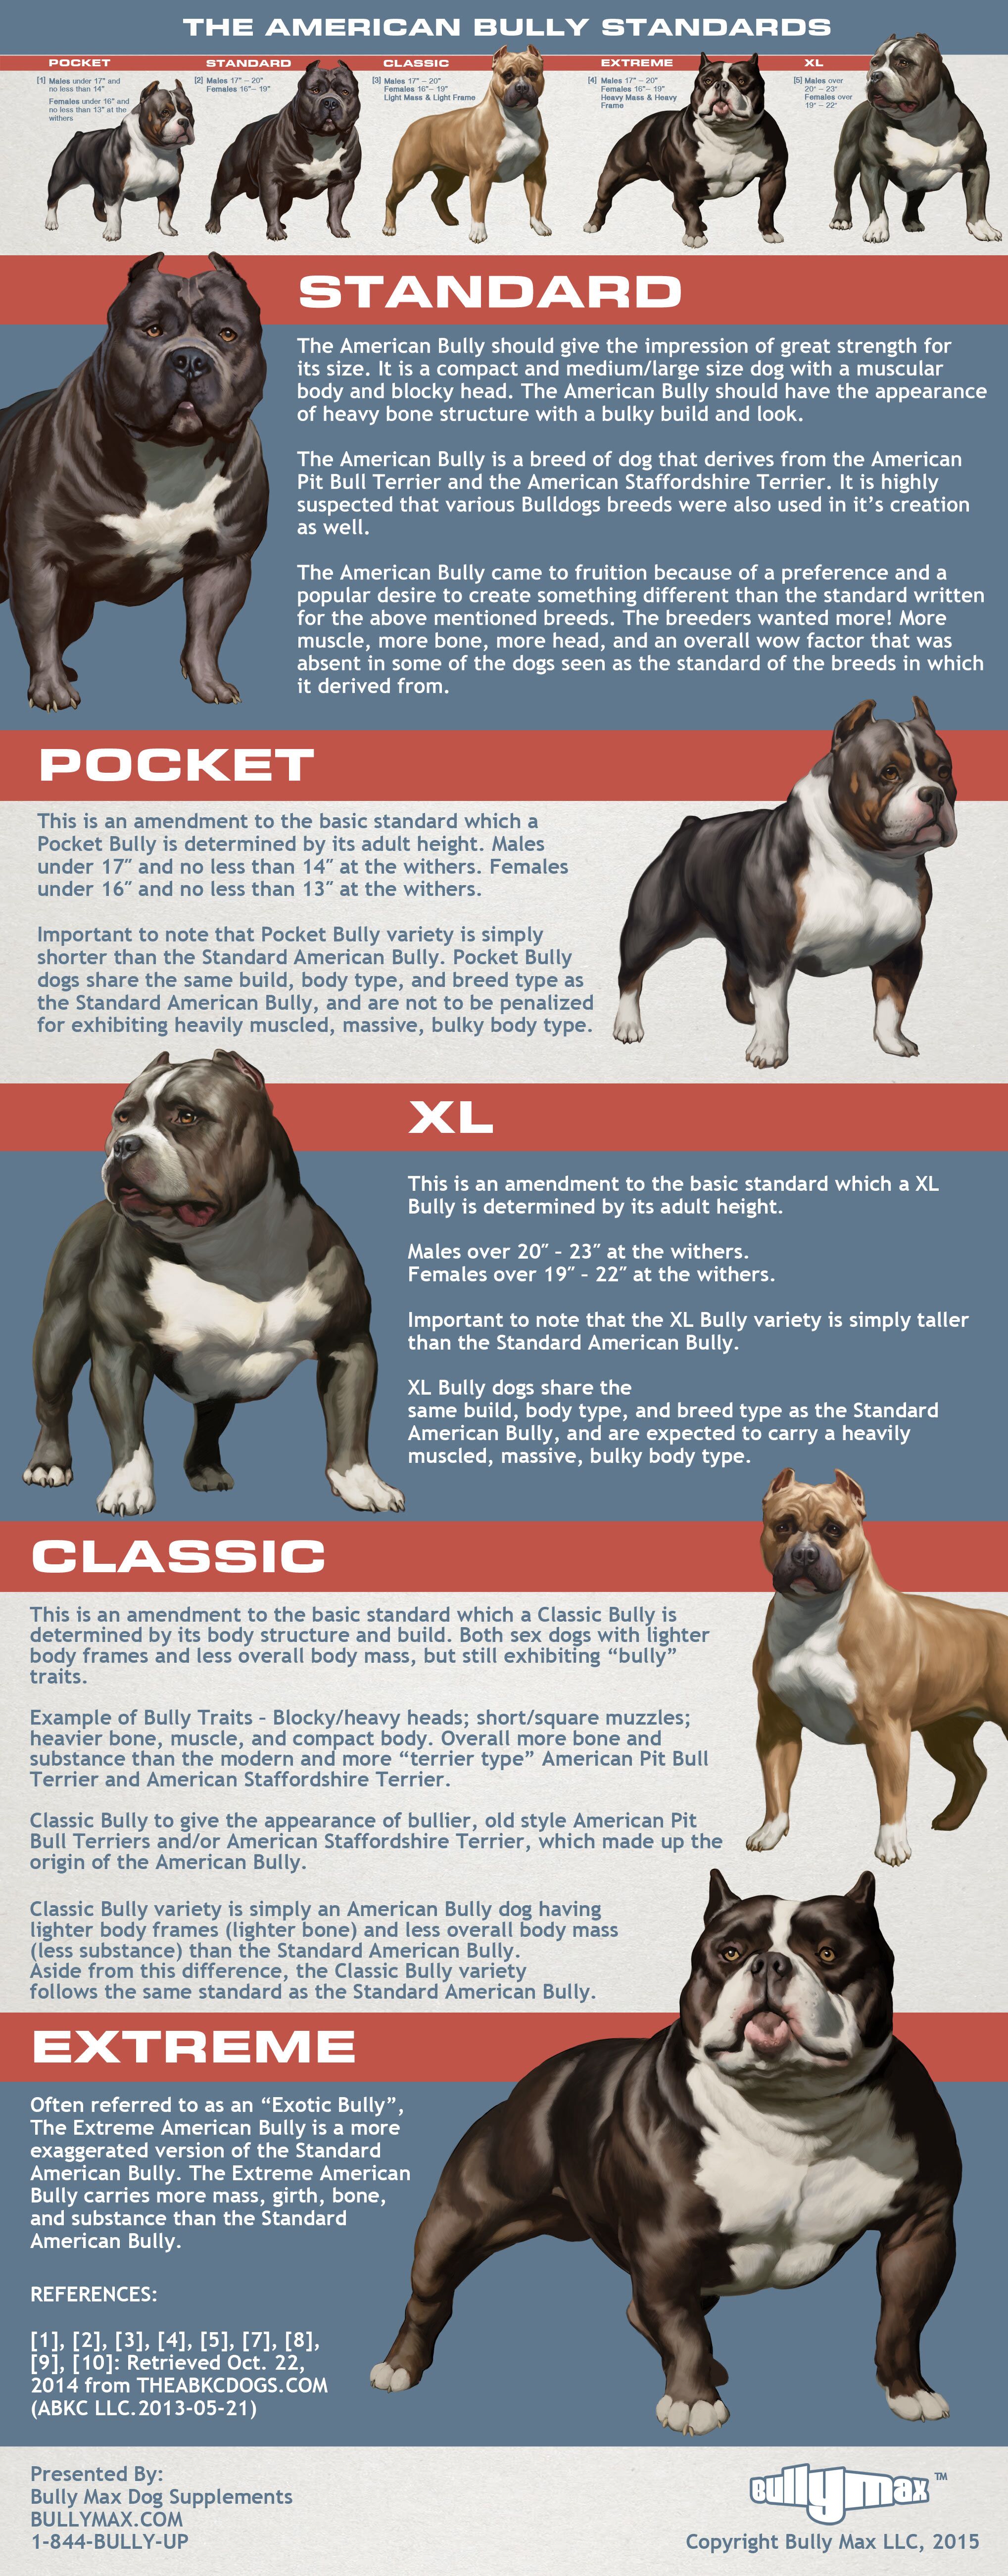 The American Bully Standards: Presented by Bully Max™ - Bully Max